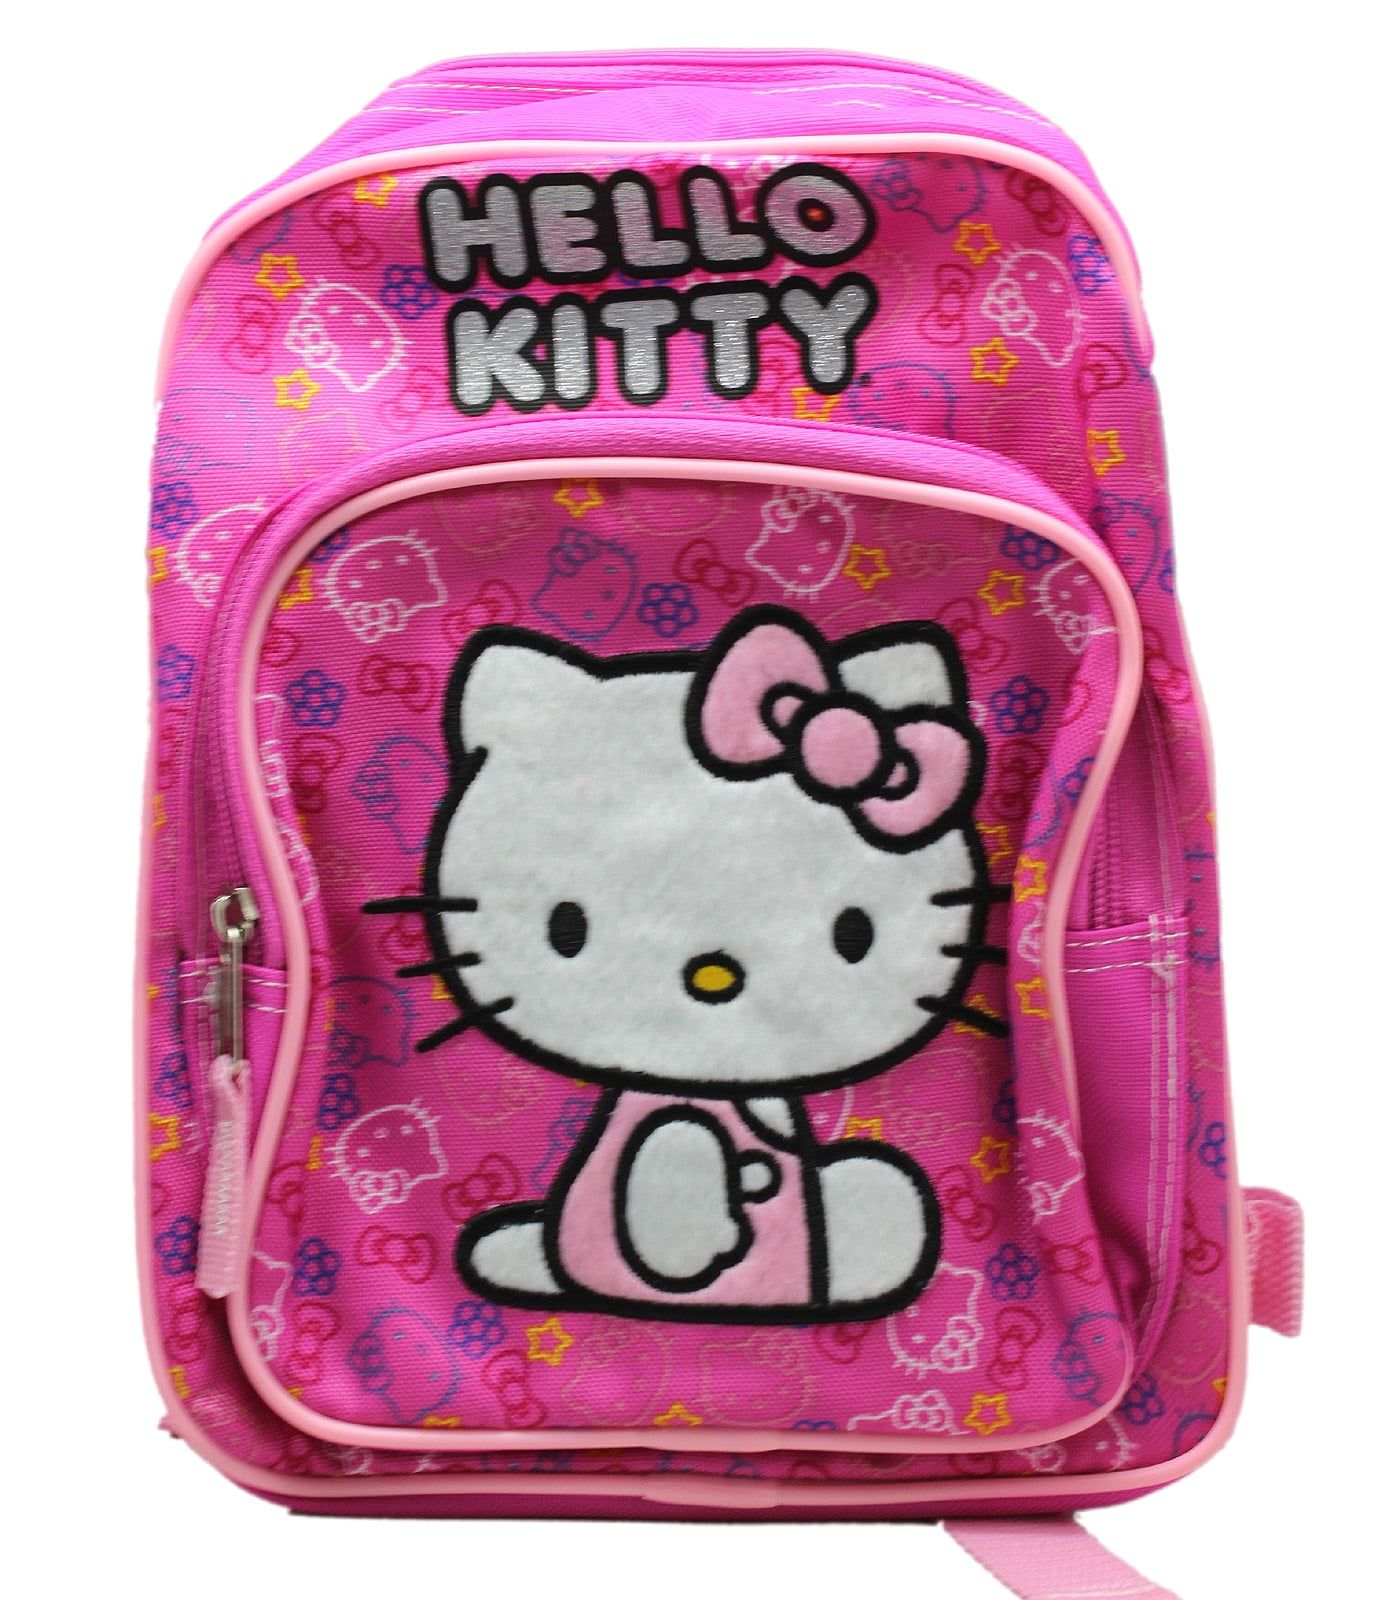 Mini Backpack - Hello Kitty - Pink Kitty Head & Bows 10 inch New School Bag 824997, Girl's, Size: 10H x 8W x 4.25D